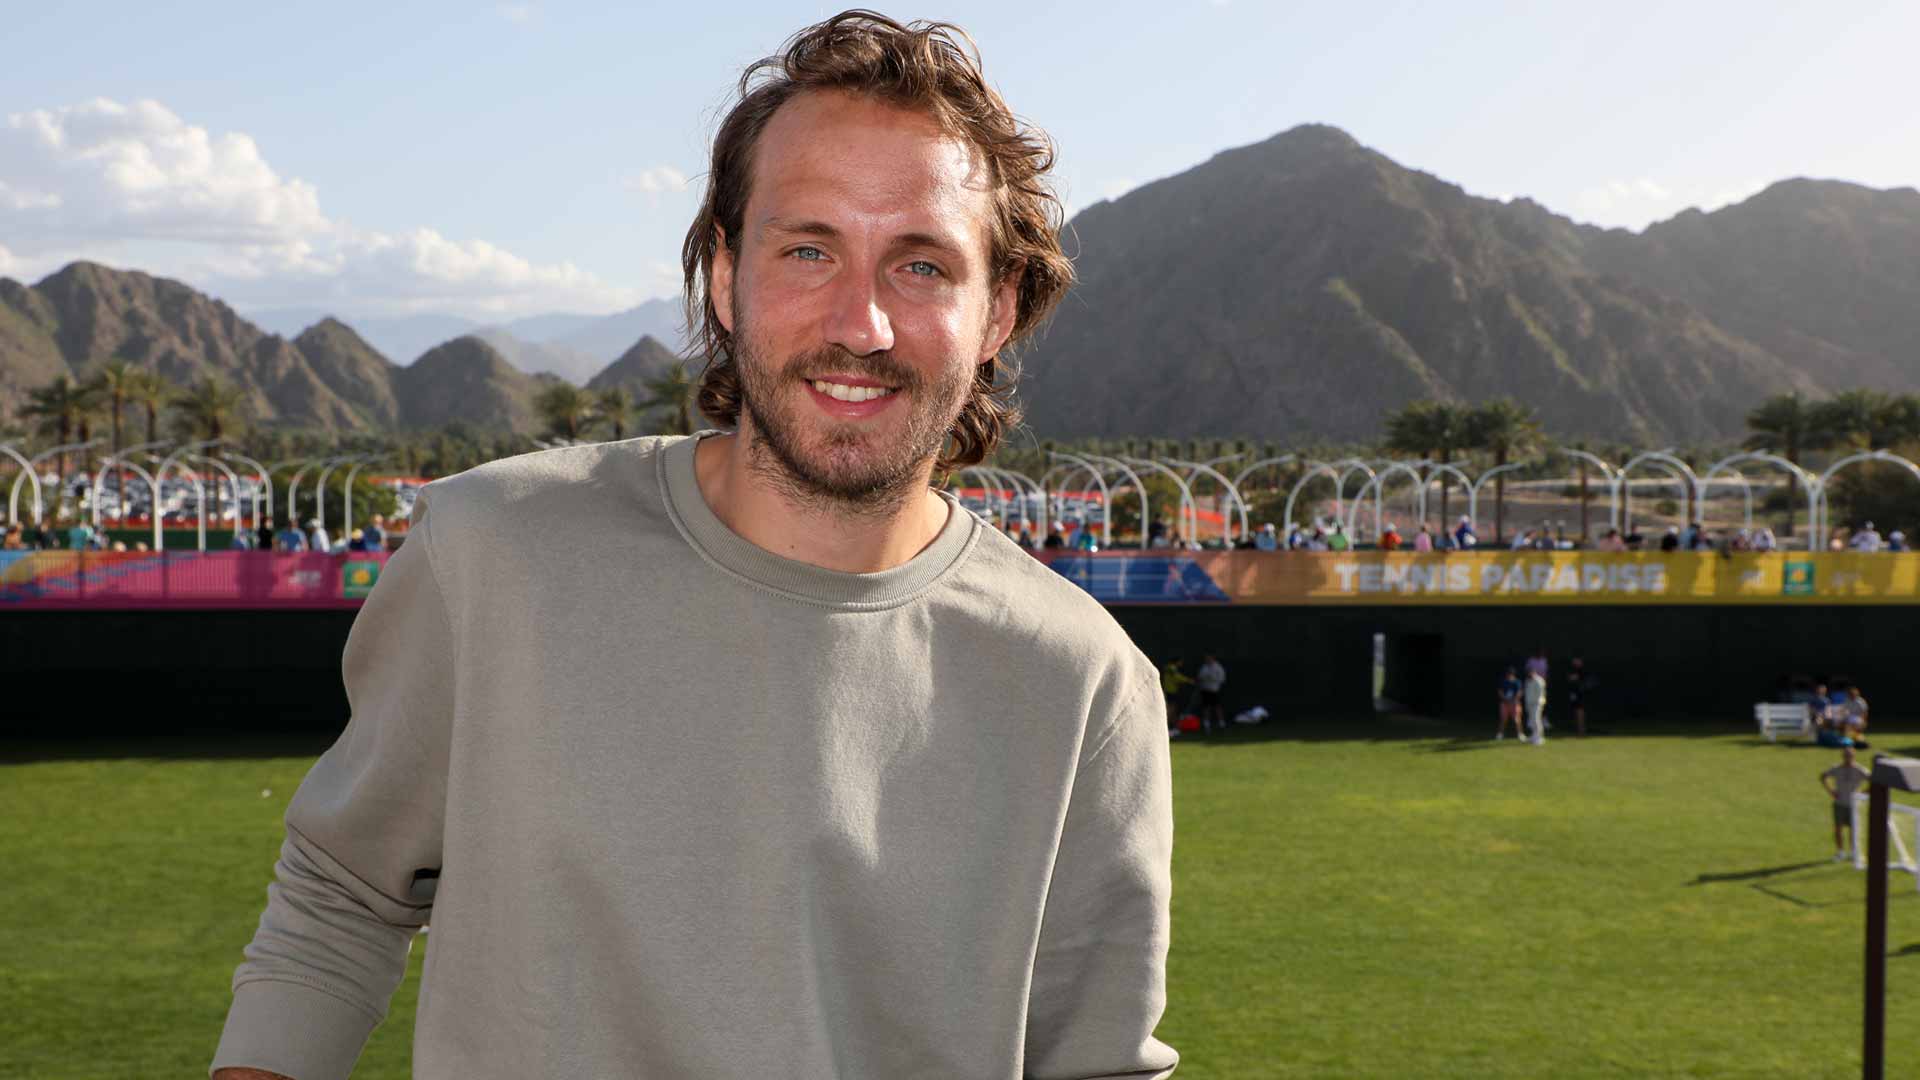 Lucas Pouille is competing at Indian Wells for the first time since 2019.